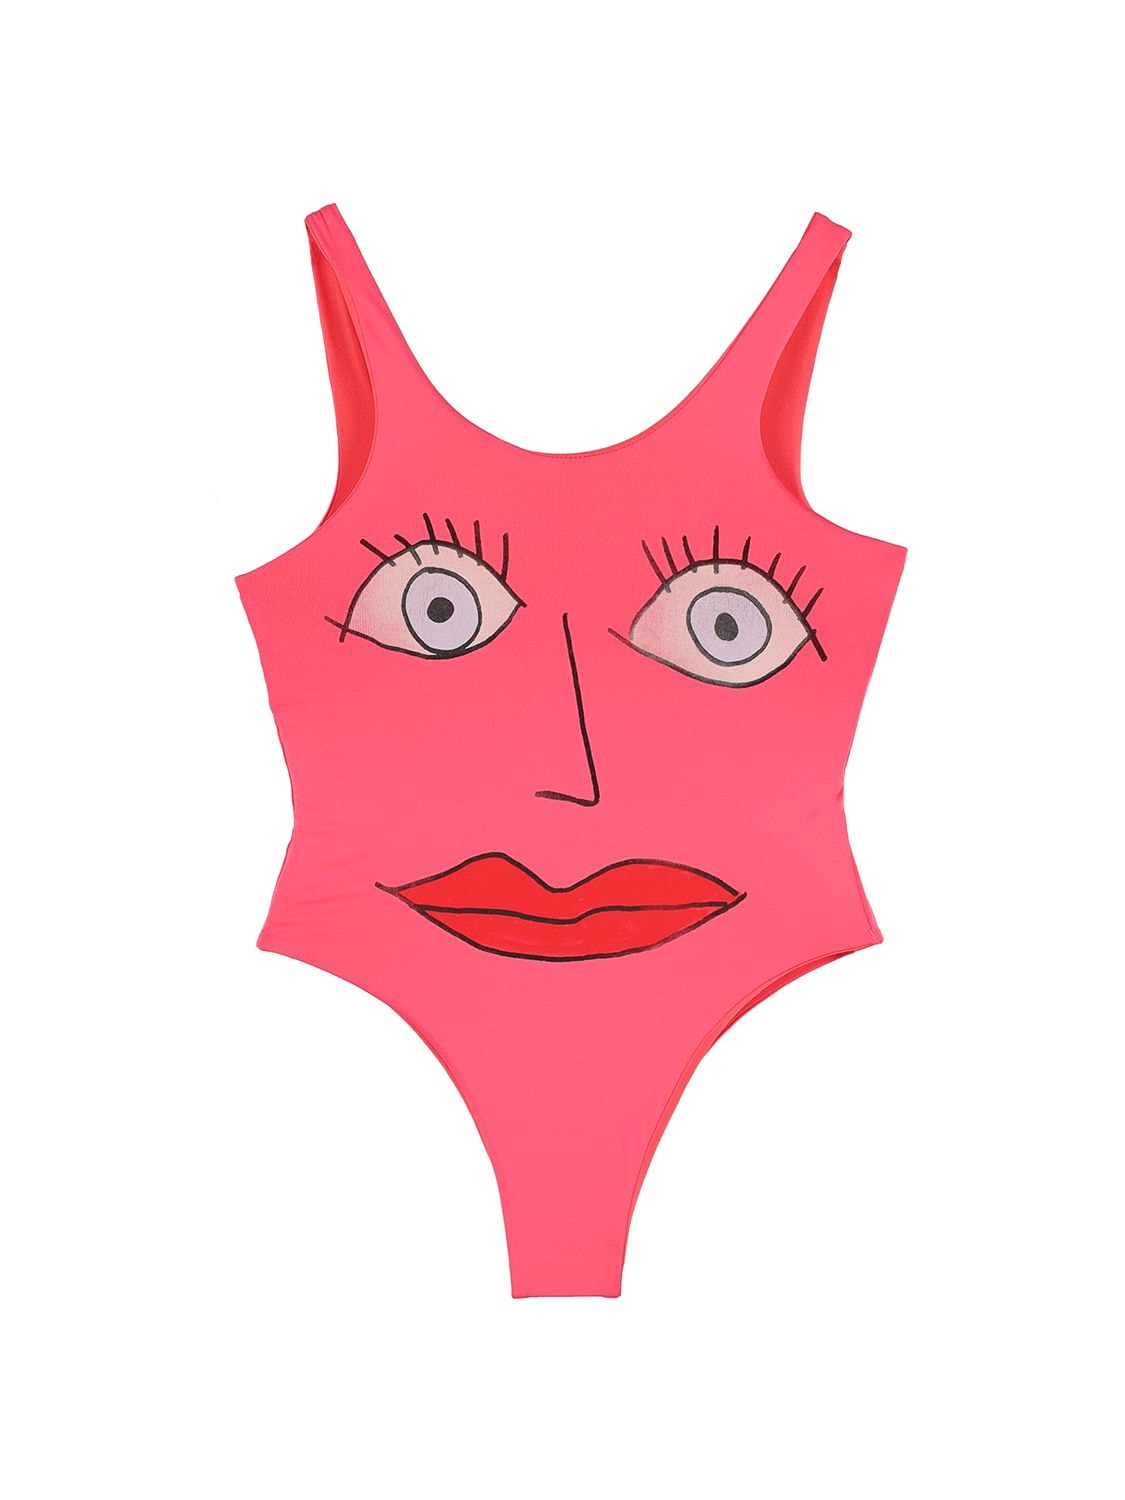 THE ANIMALS OBSERVATORY FACE PRINT TECH ONE PIECE SWIMSUIT